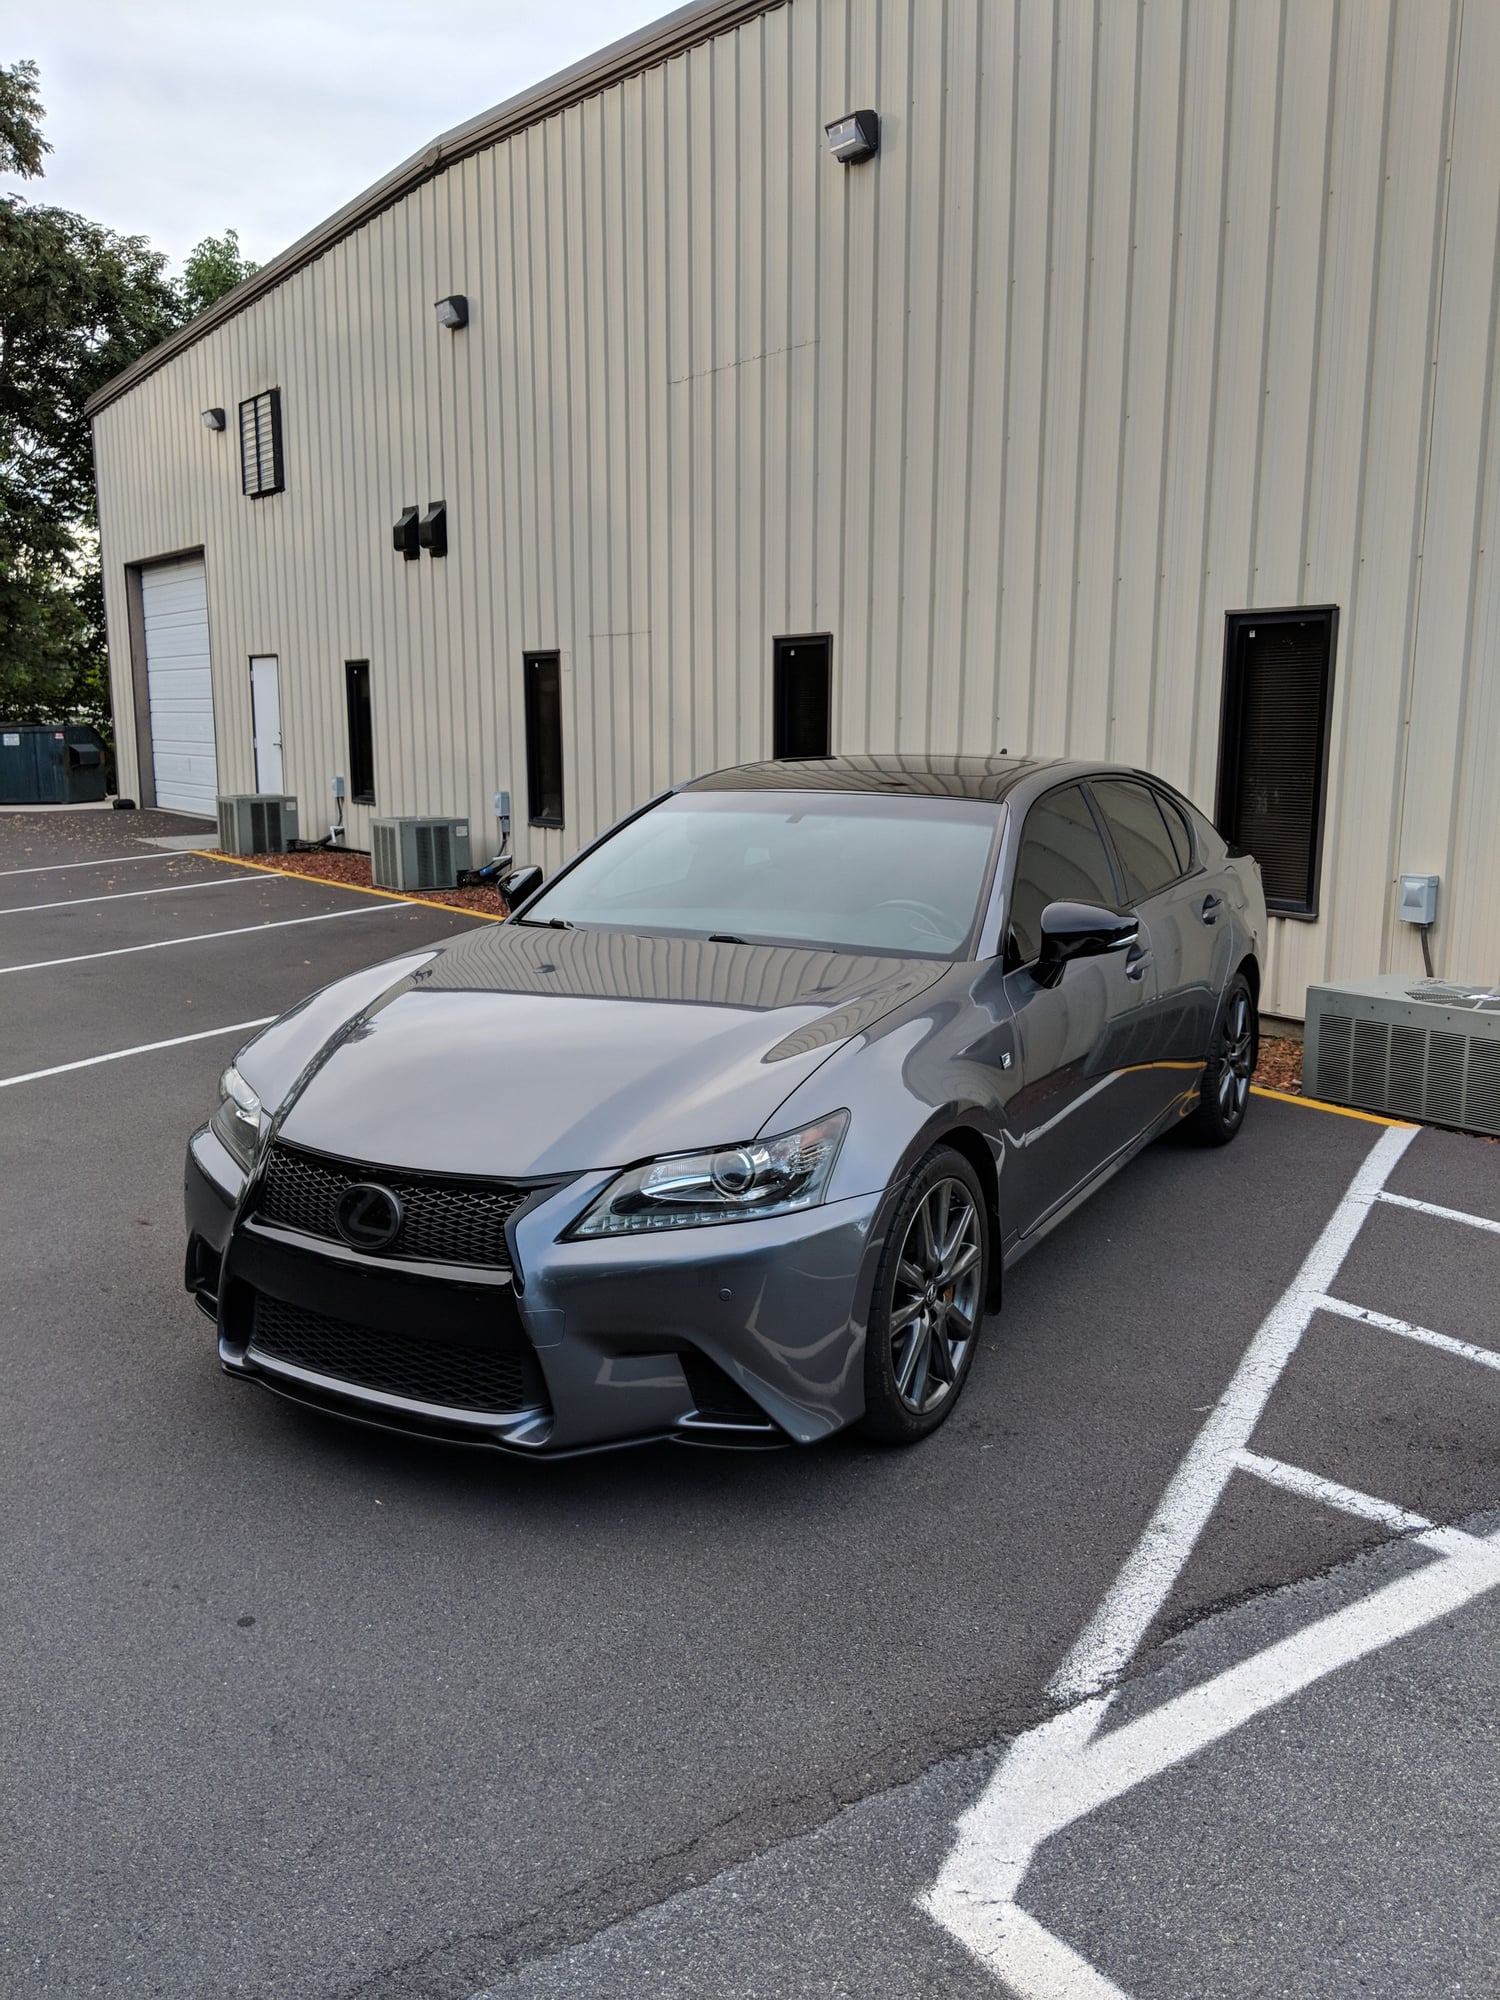 2013 Lexus GS350 - 2013 GS 350 F-Sport in Nebula Gray Pearl EXCELLENT Condition! - Used - VIN JTHBE1BL5D5028682 - 67,500 Miles - 2WD - Automatic - Sedan - Gray - Johnson City, TN 37604, United States